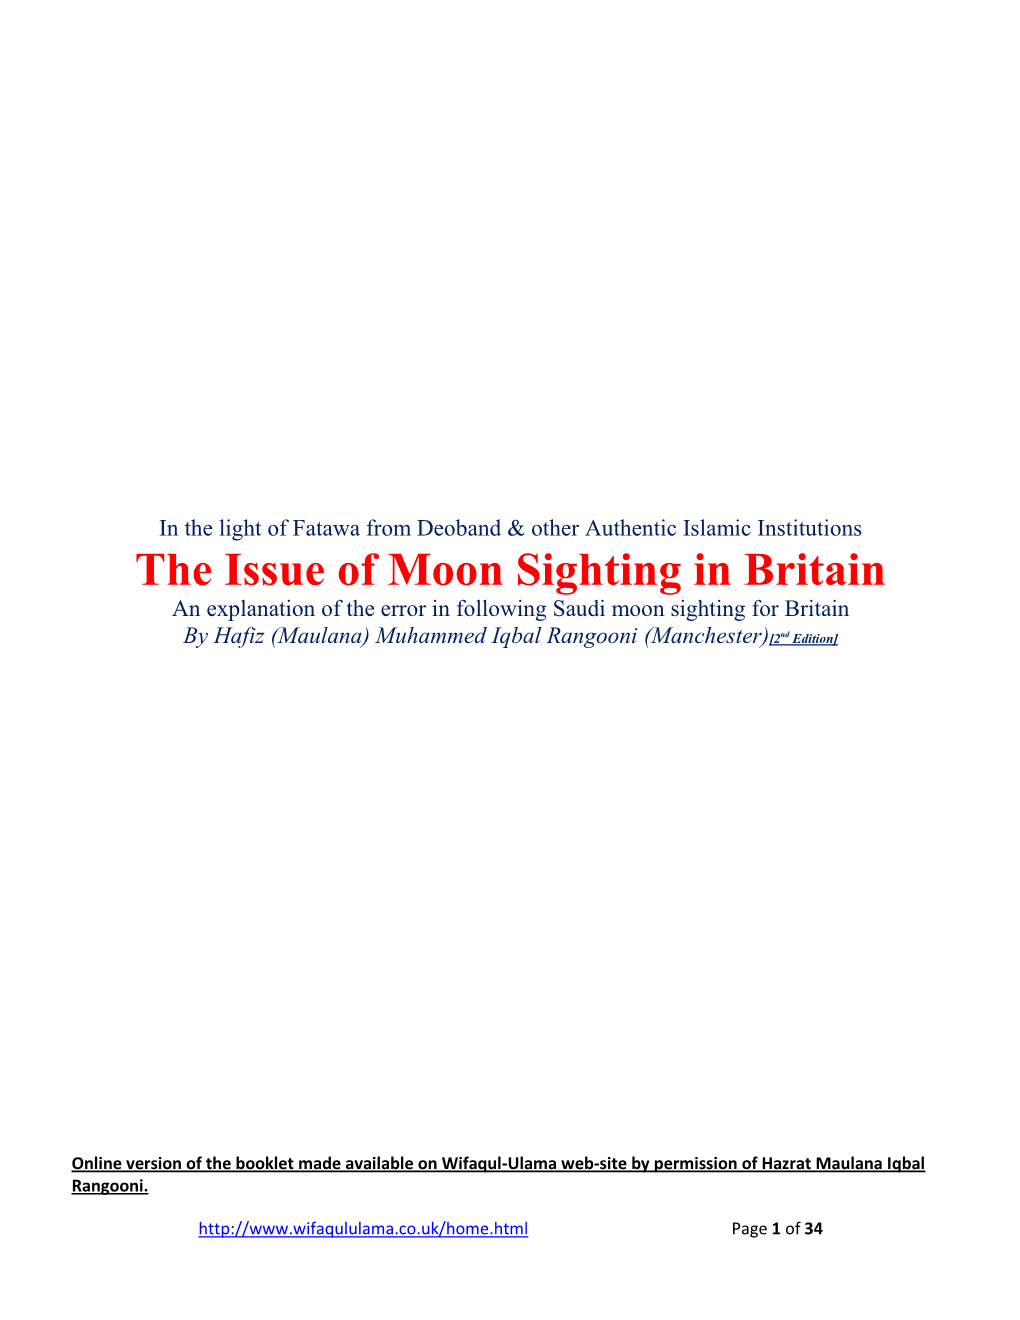 The Issue of Moon Sighting in Britain